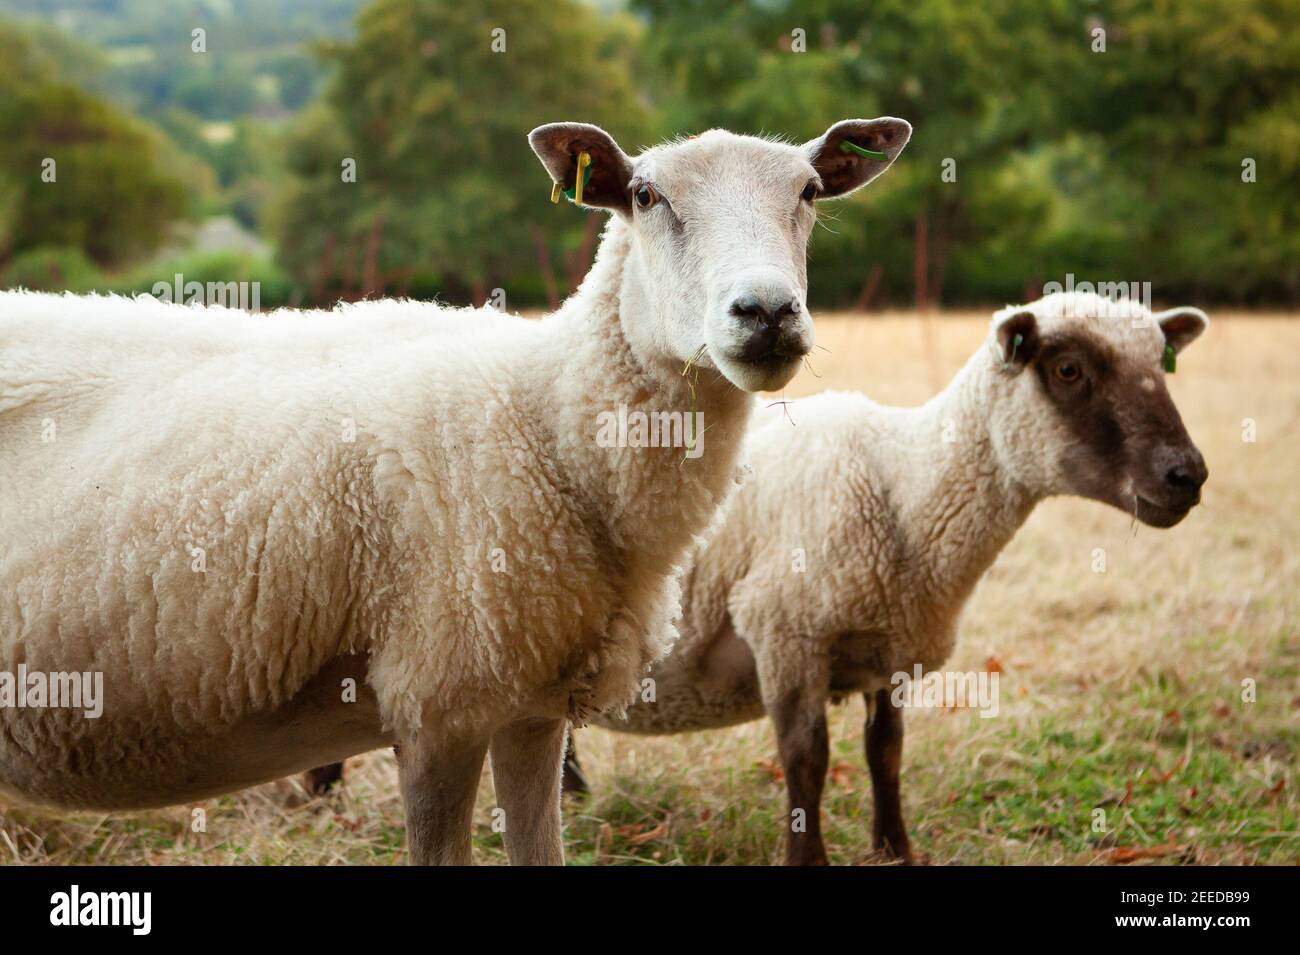 White sheep in a field, Kent Stock Photo